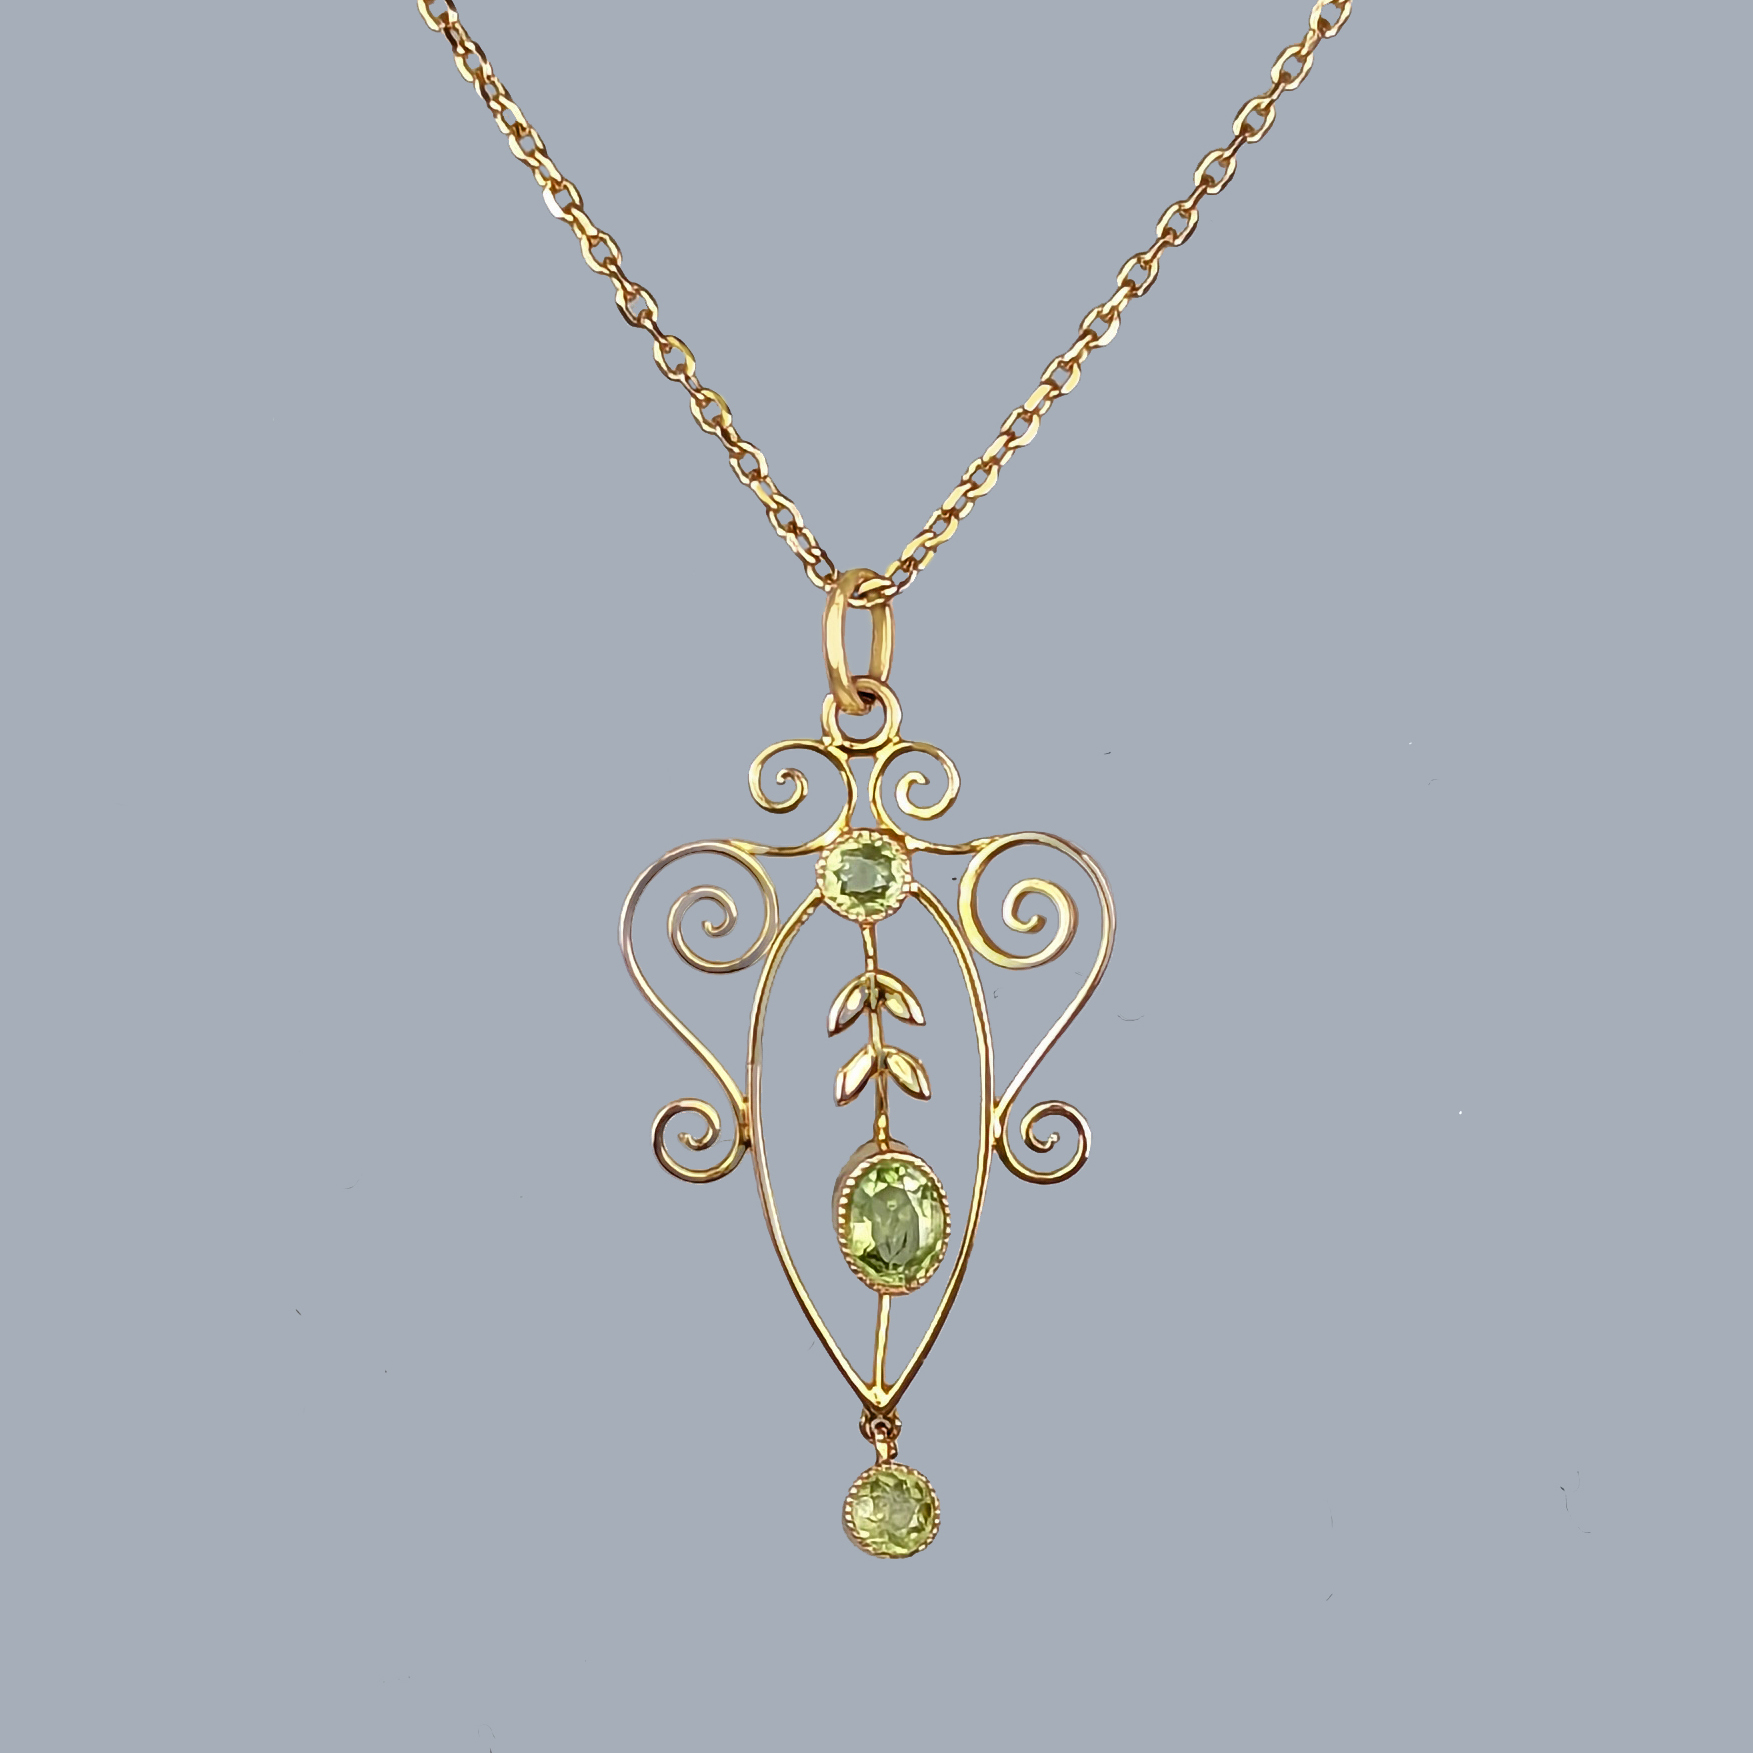 Gold Pendant set with 3 Peridot Stones on gold chain